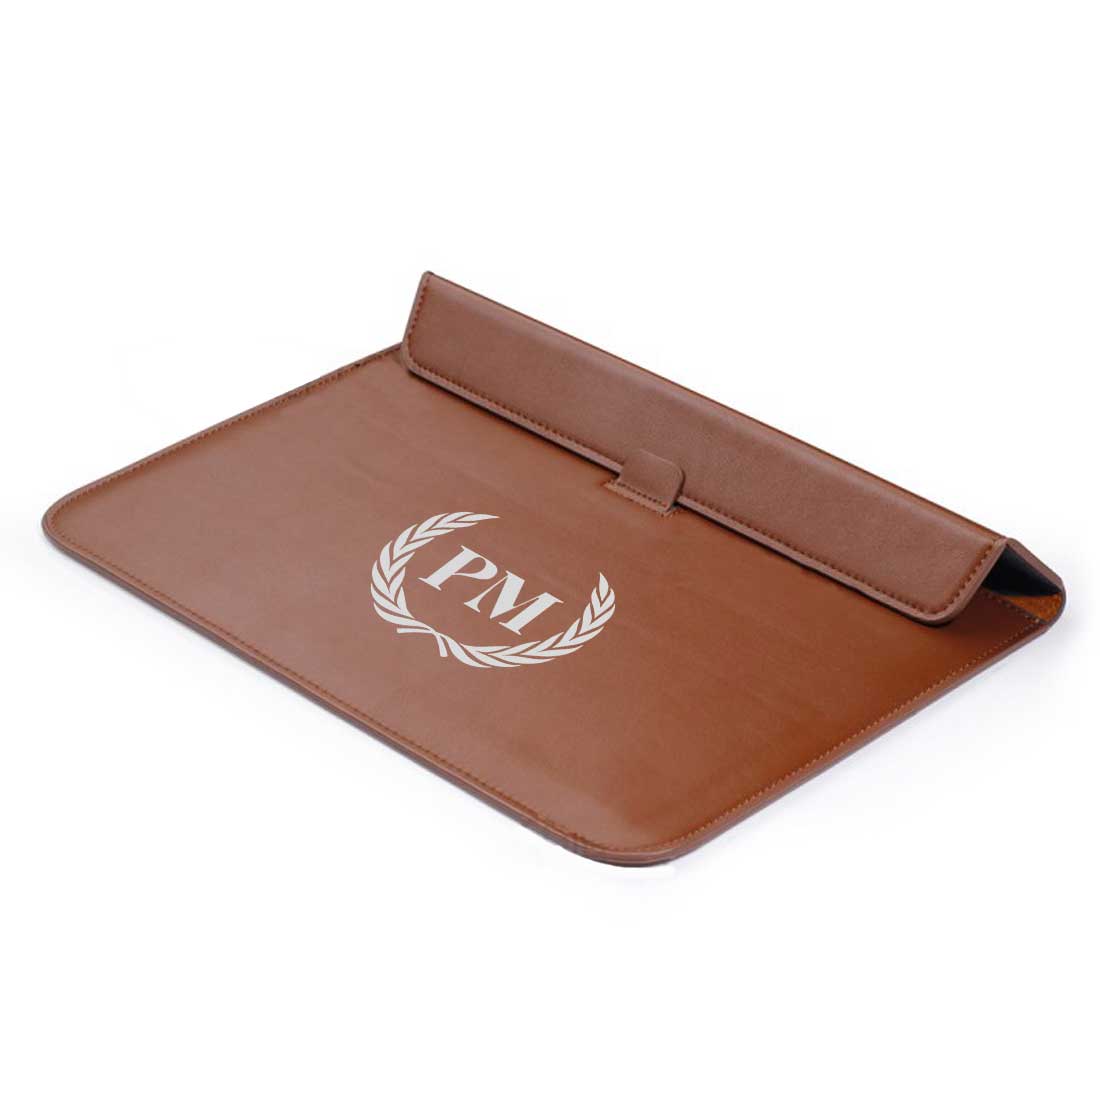 Personalized Laptop Cover For Men - Add Your Initial Leaves Crown Nutcase